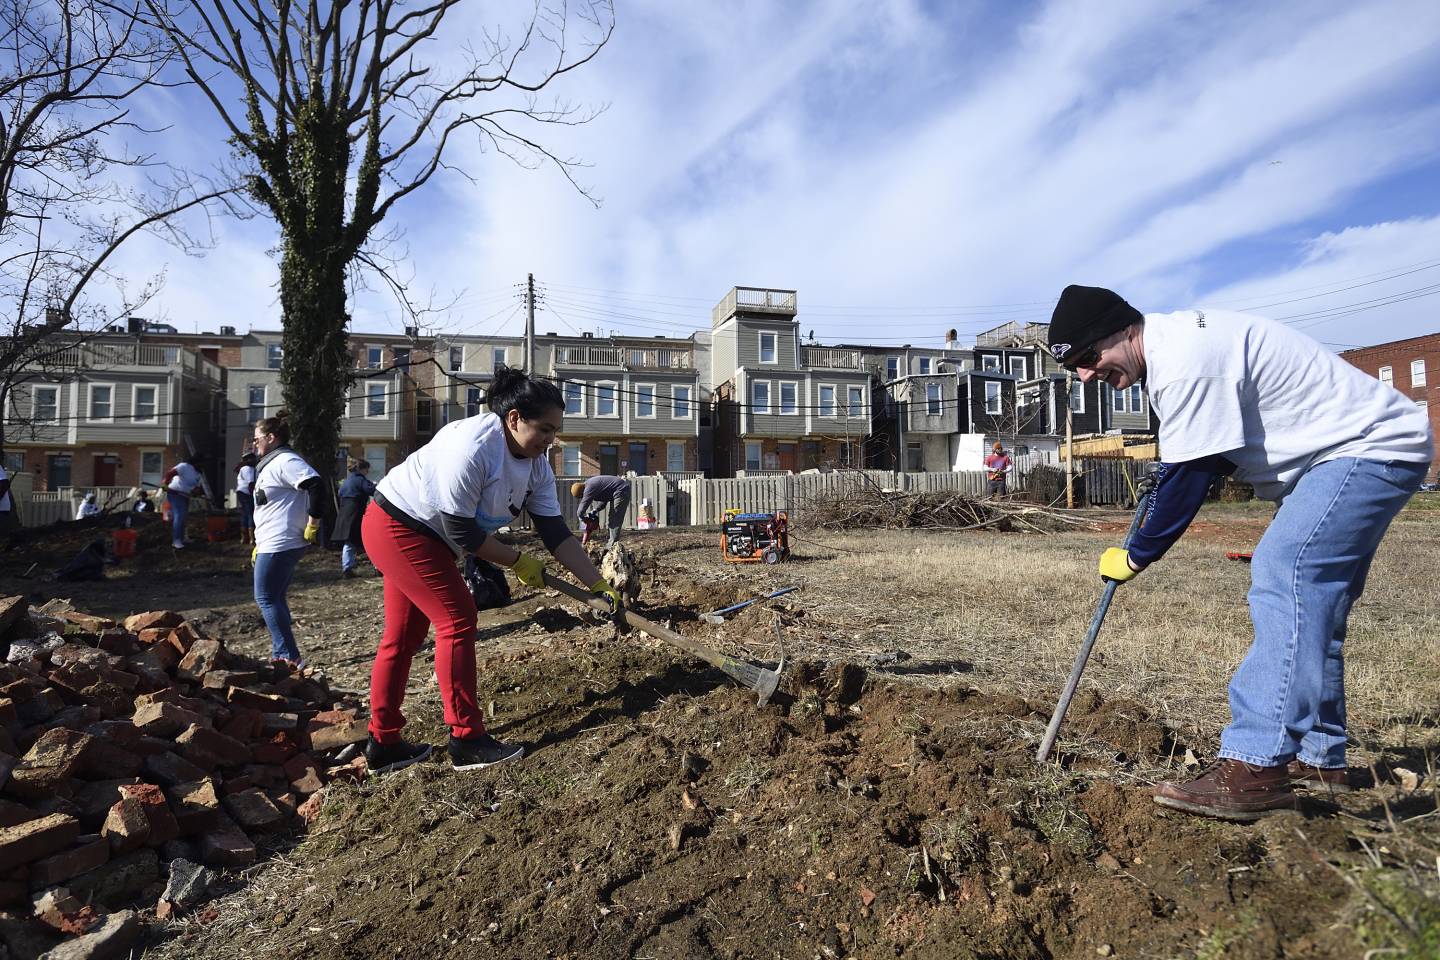 Volunteers shovel and ice pick ground in a vacant Baltimore lot